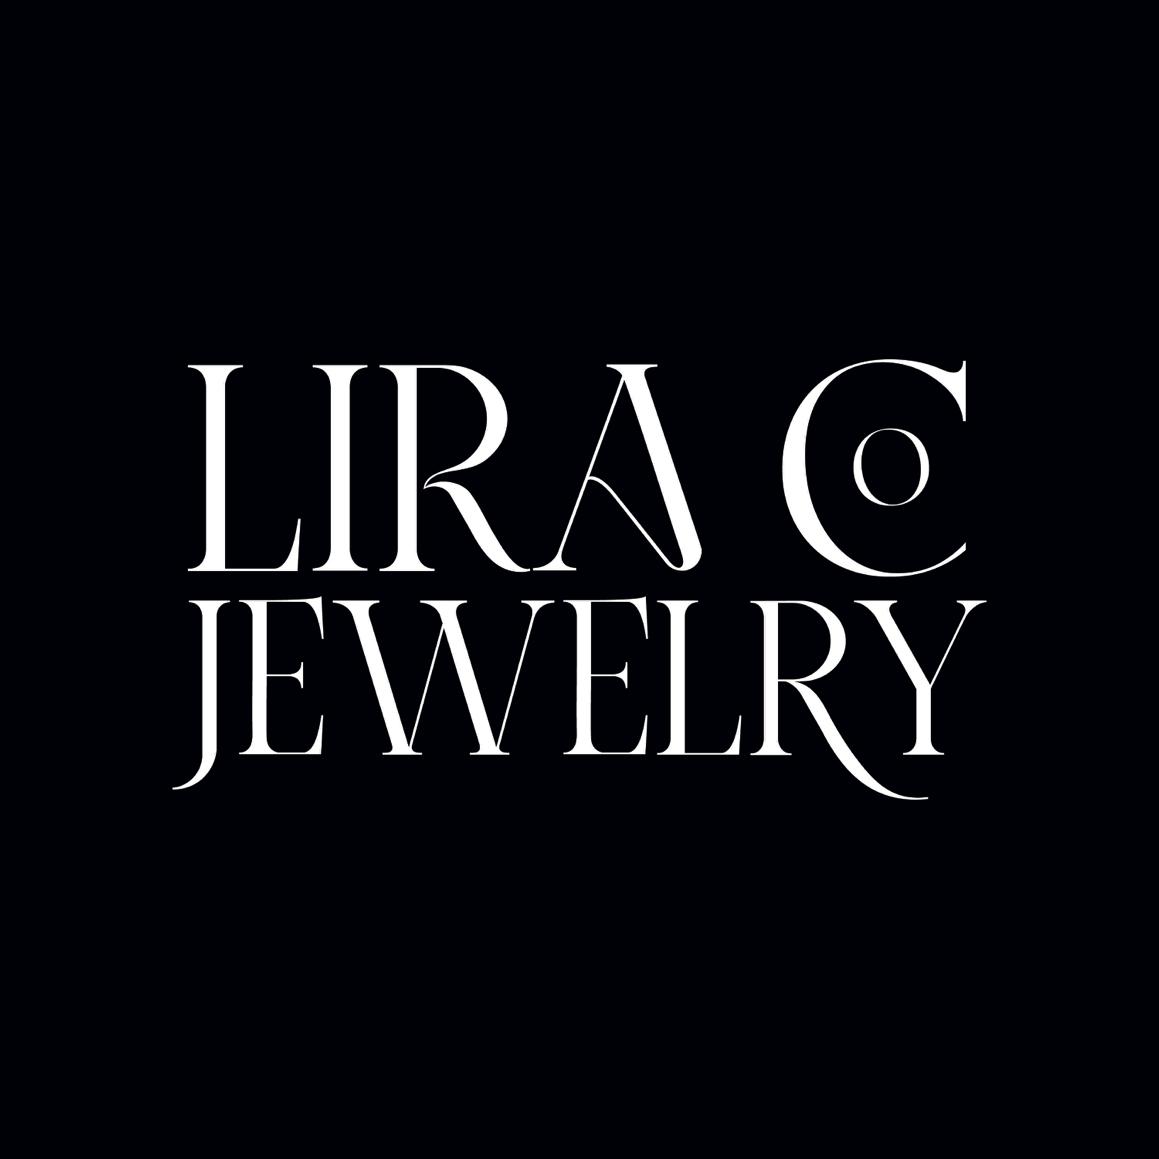 LiraCoJewelry's images